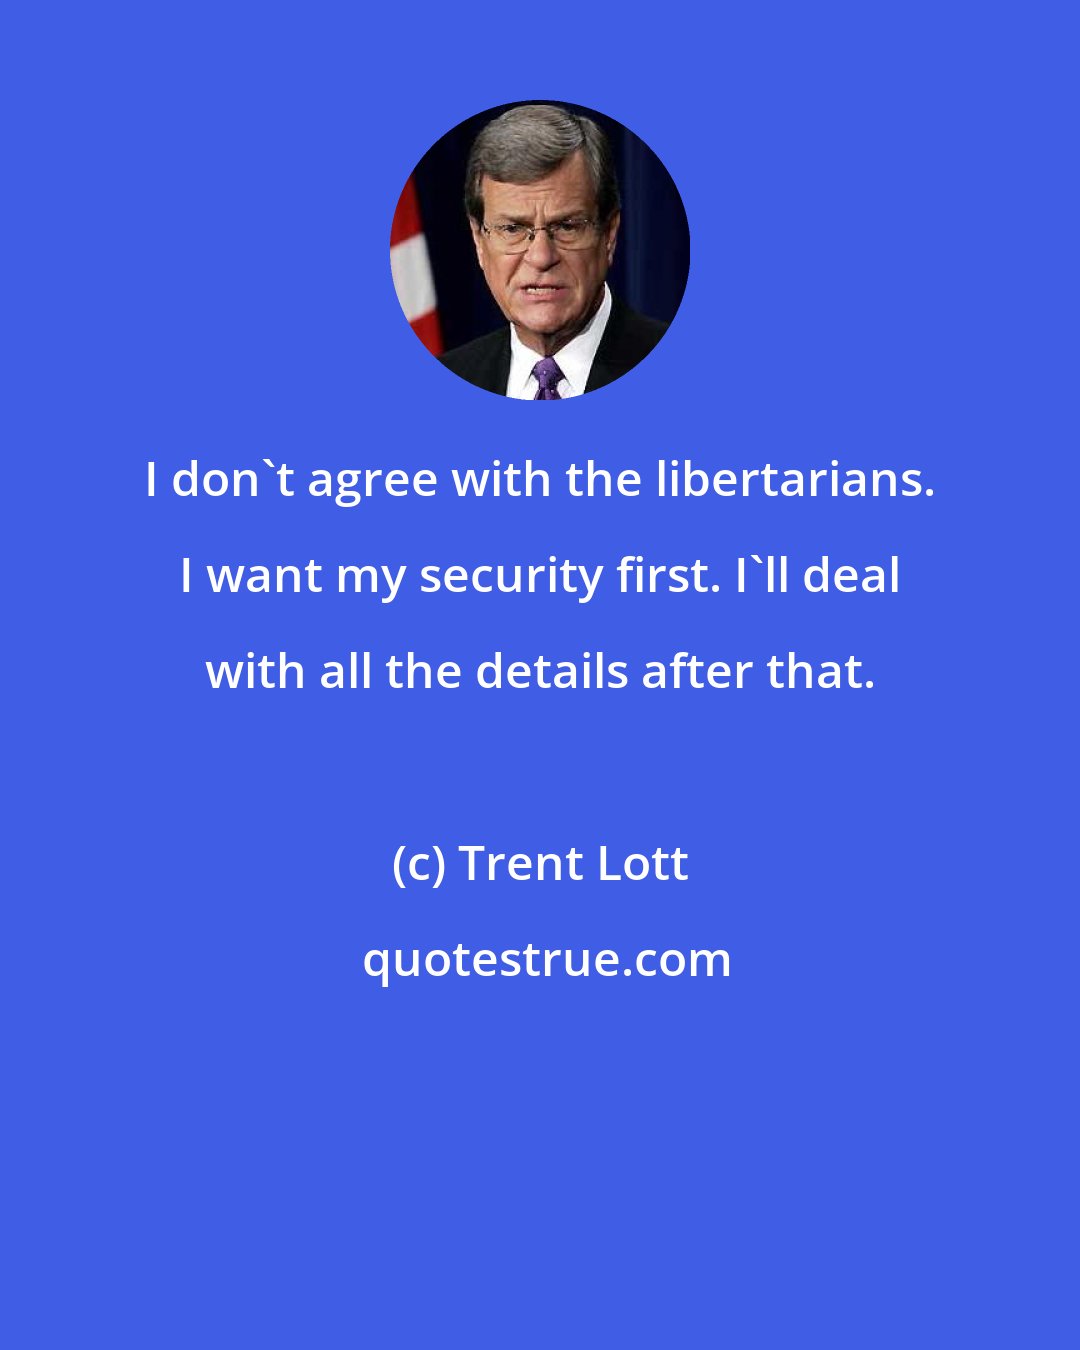 Trent Lott: I don't agree with the libertarians. I want my security first. I'll deal with all the details after that.